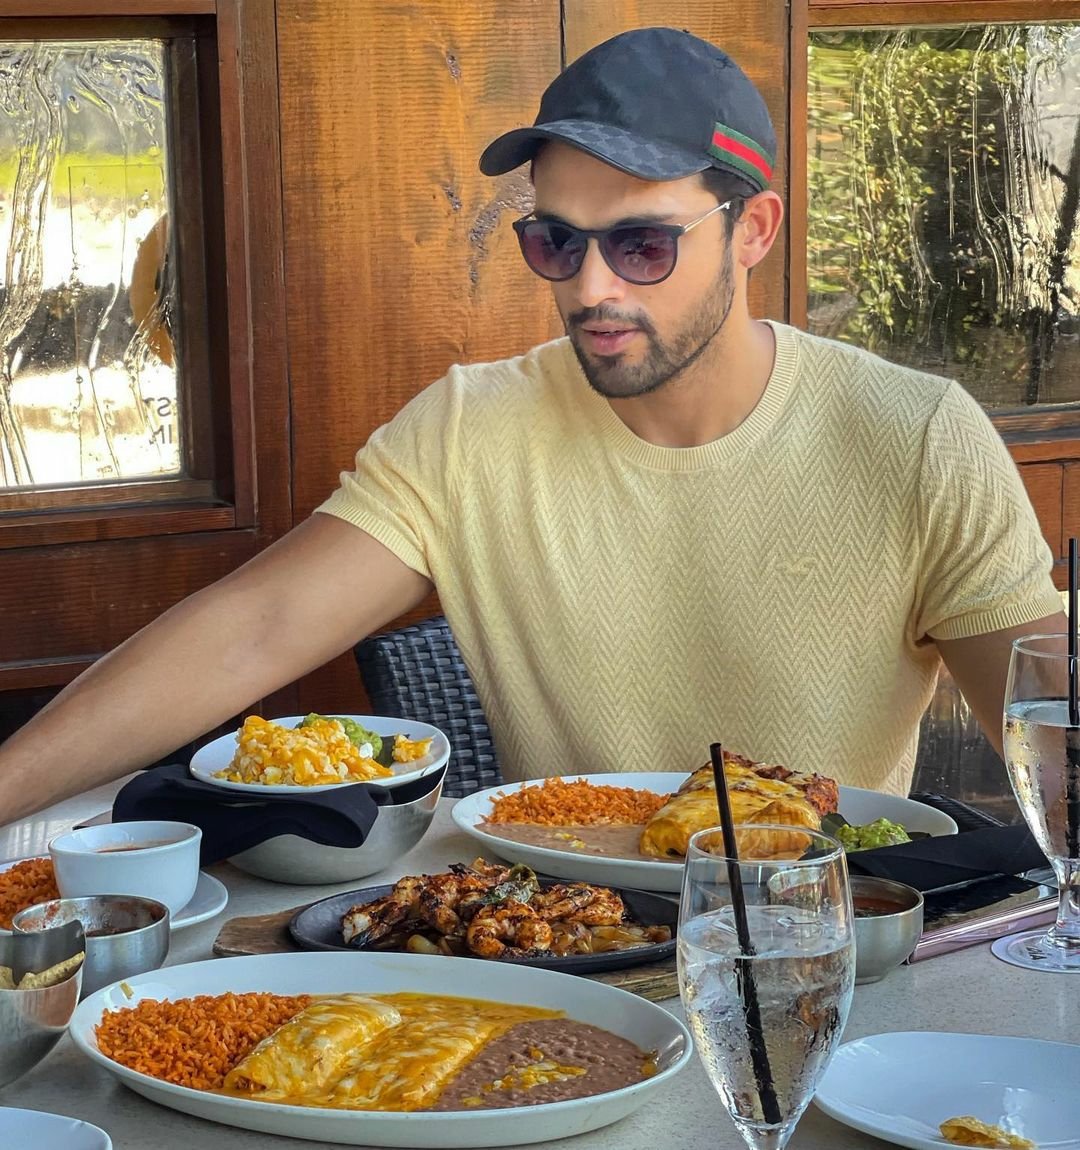 Me thinking of becoming a food blogger 😋👅 #mexicanfiesta #chimichangas #fooddiaries #nazarmatlagao

~ #ParthSamthaan on Instagram ♥️

@LaghateParth